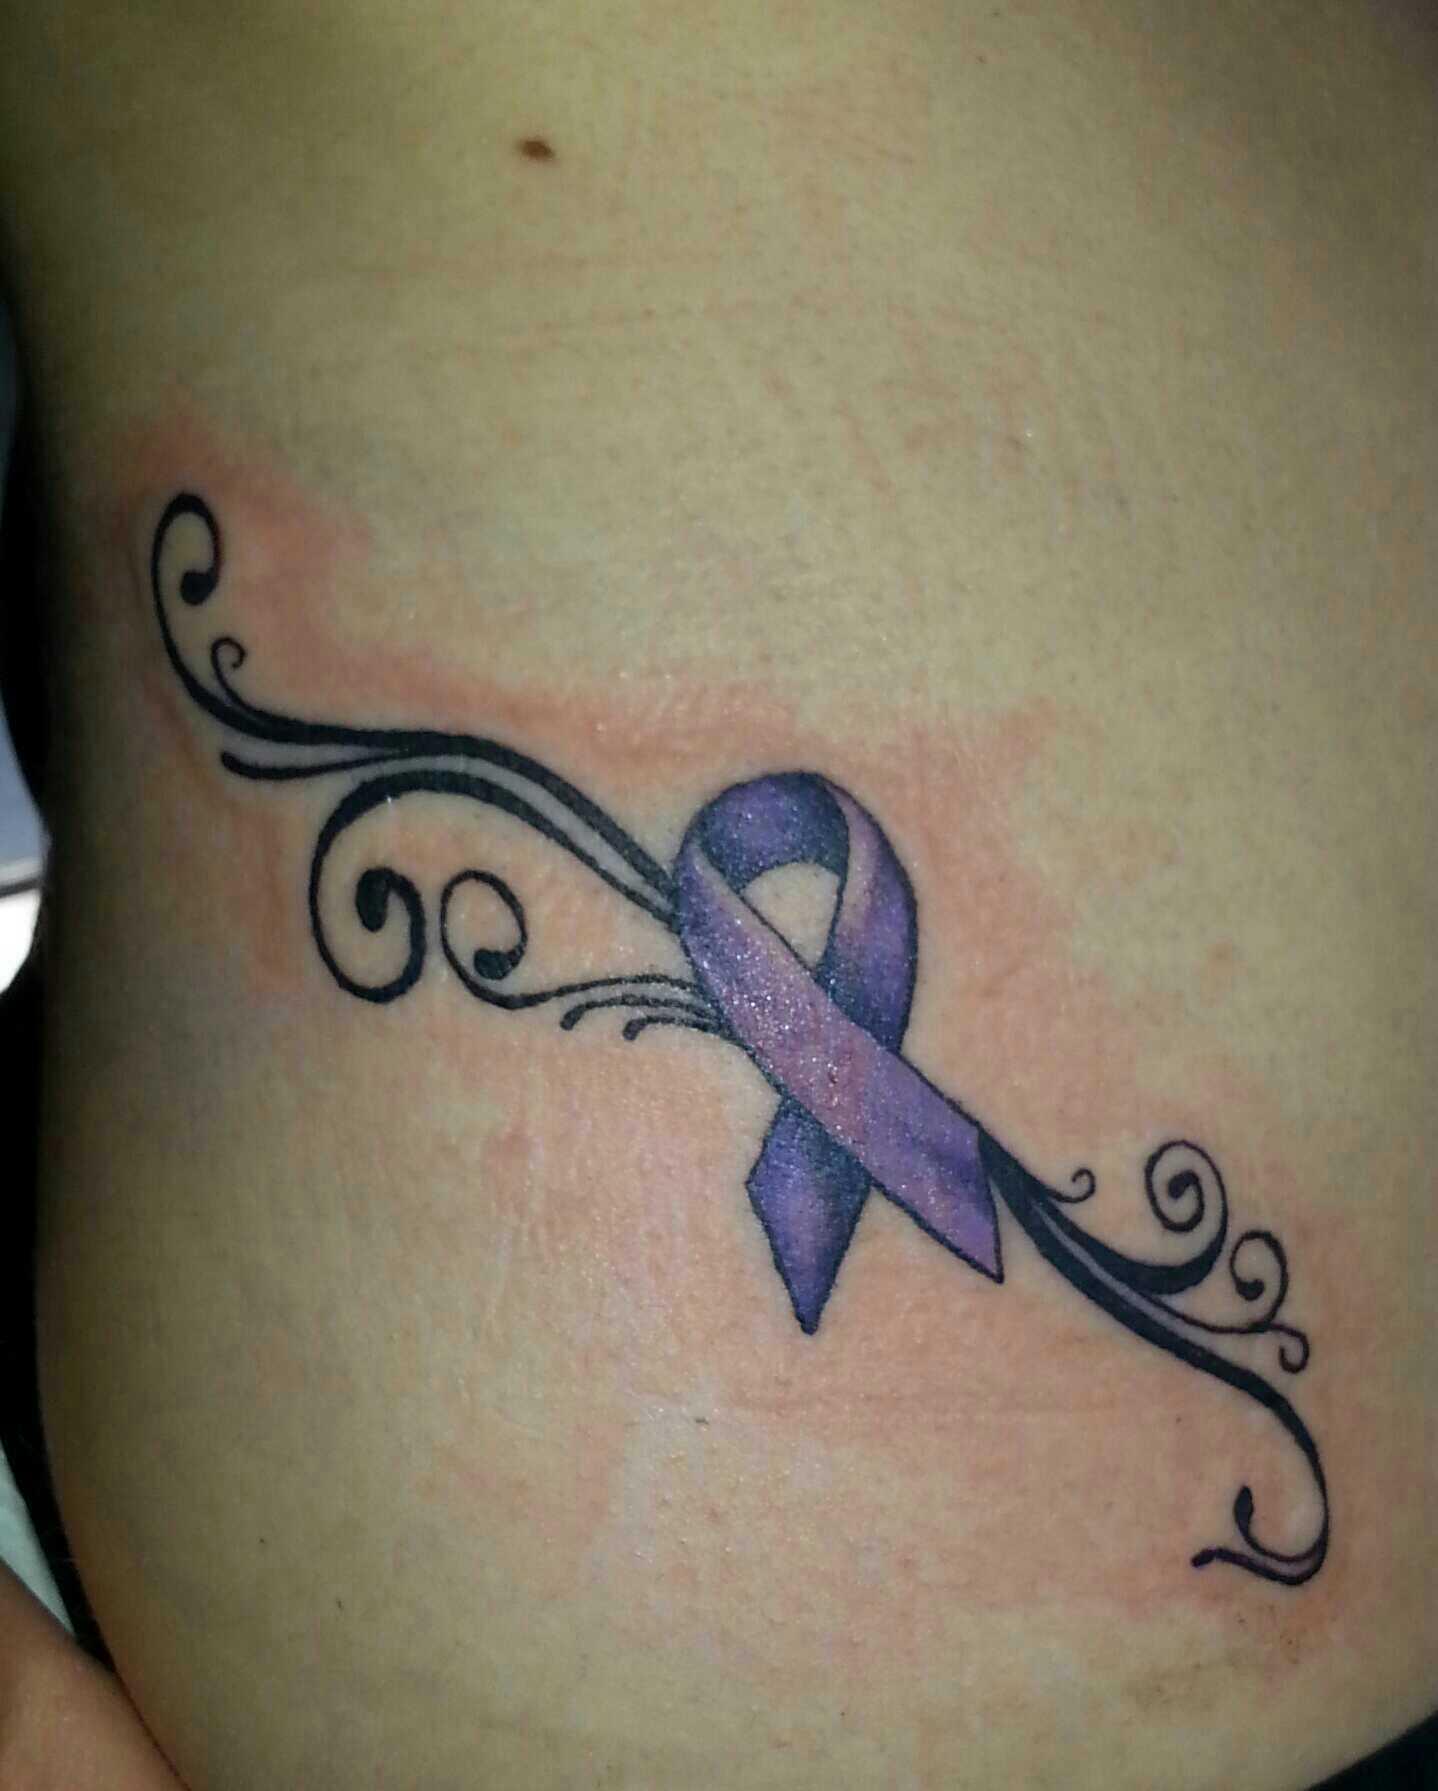 Medical Alert Tattoo  Medical alert tattoo Tattoo designs and meanings  Purple ribbon tattoos